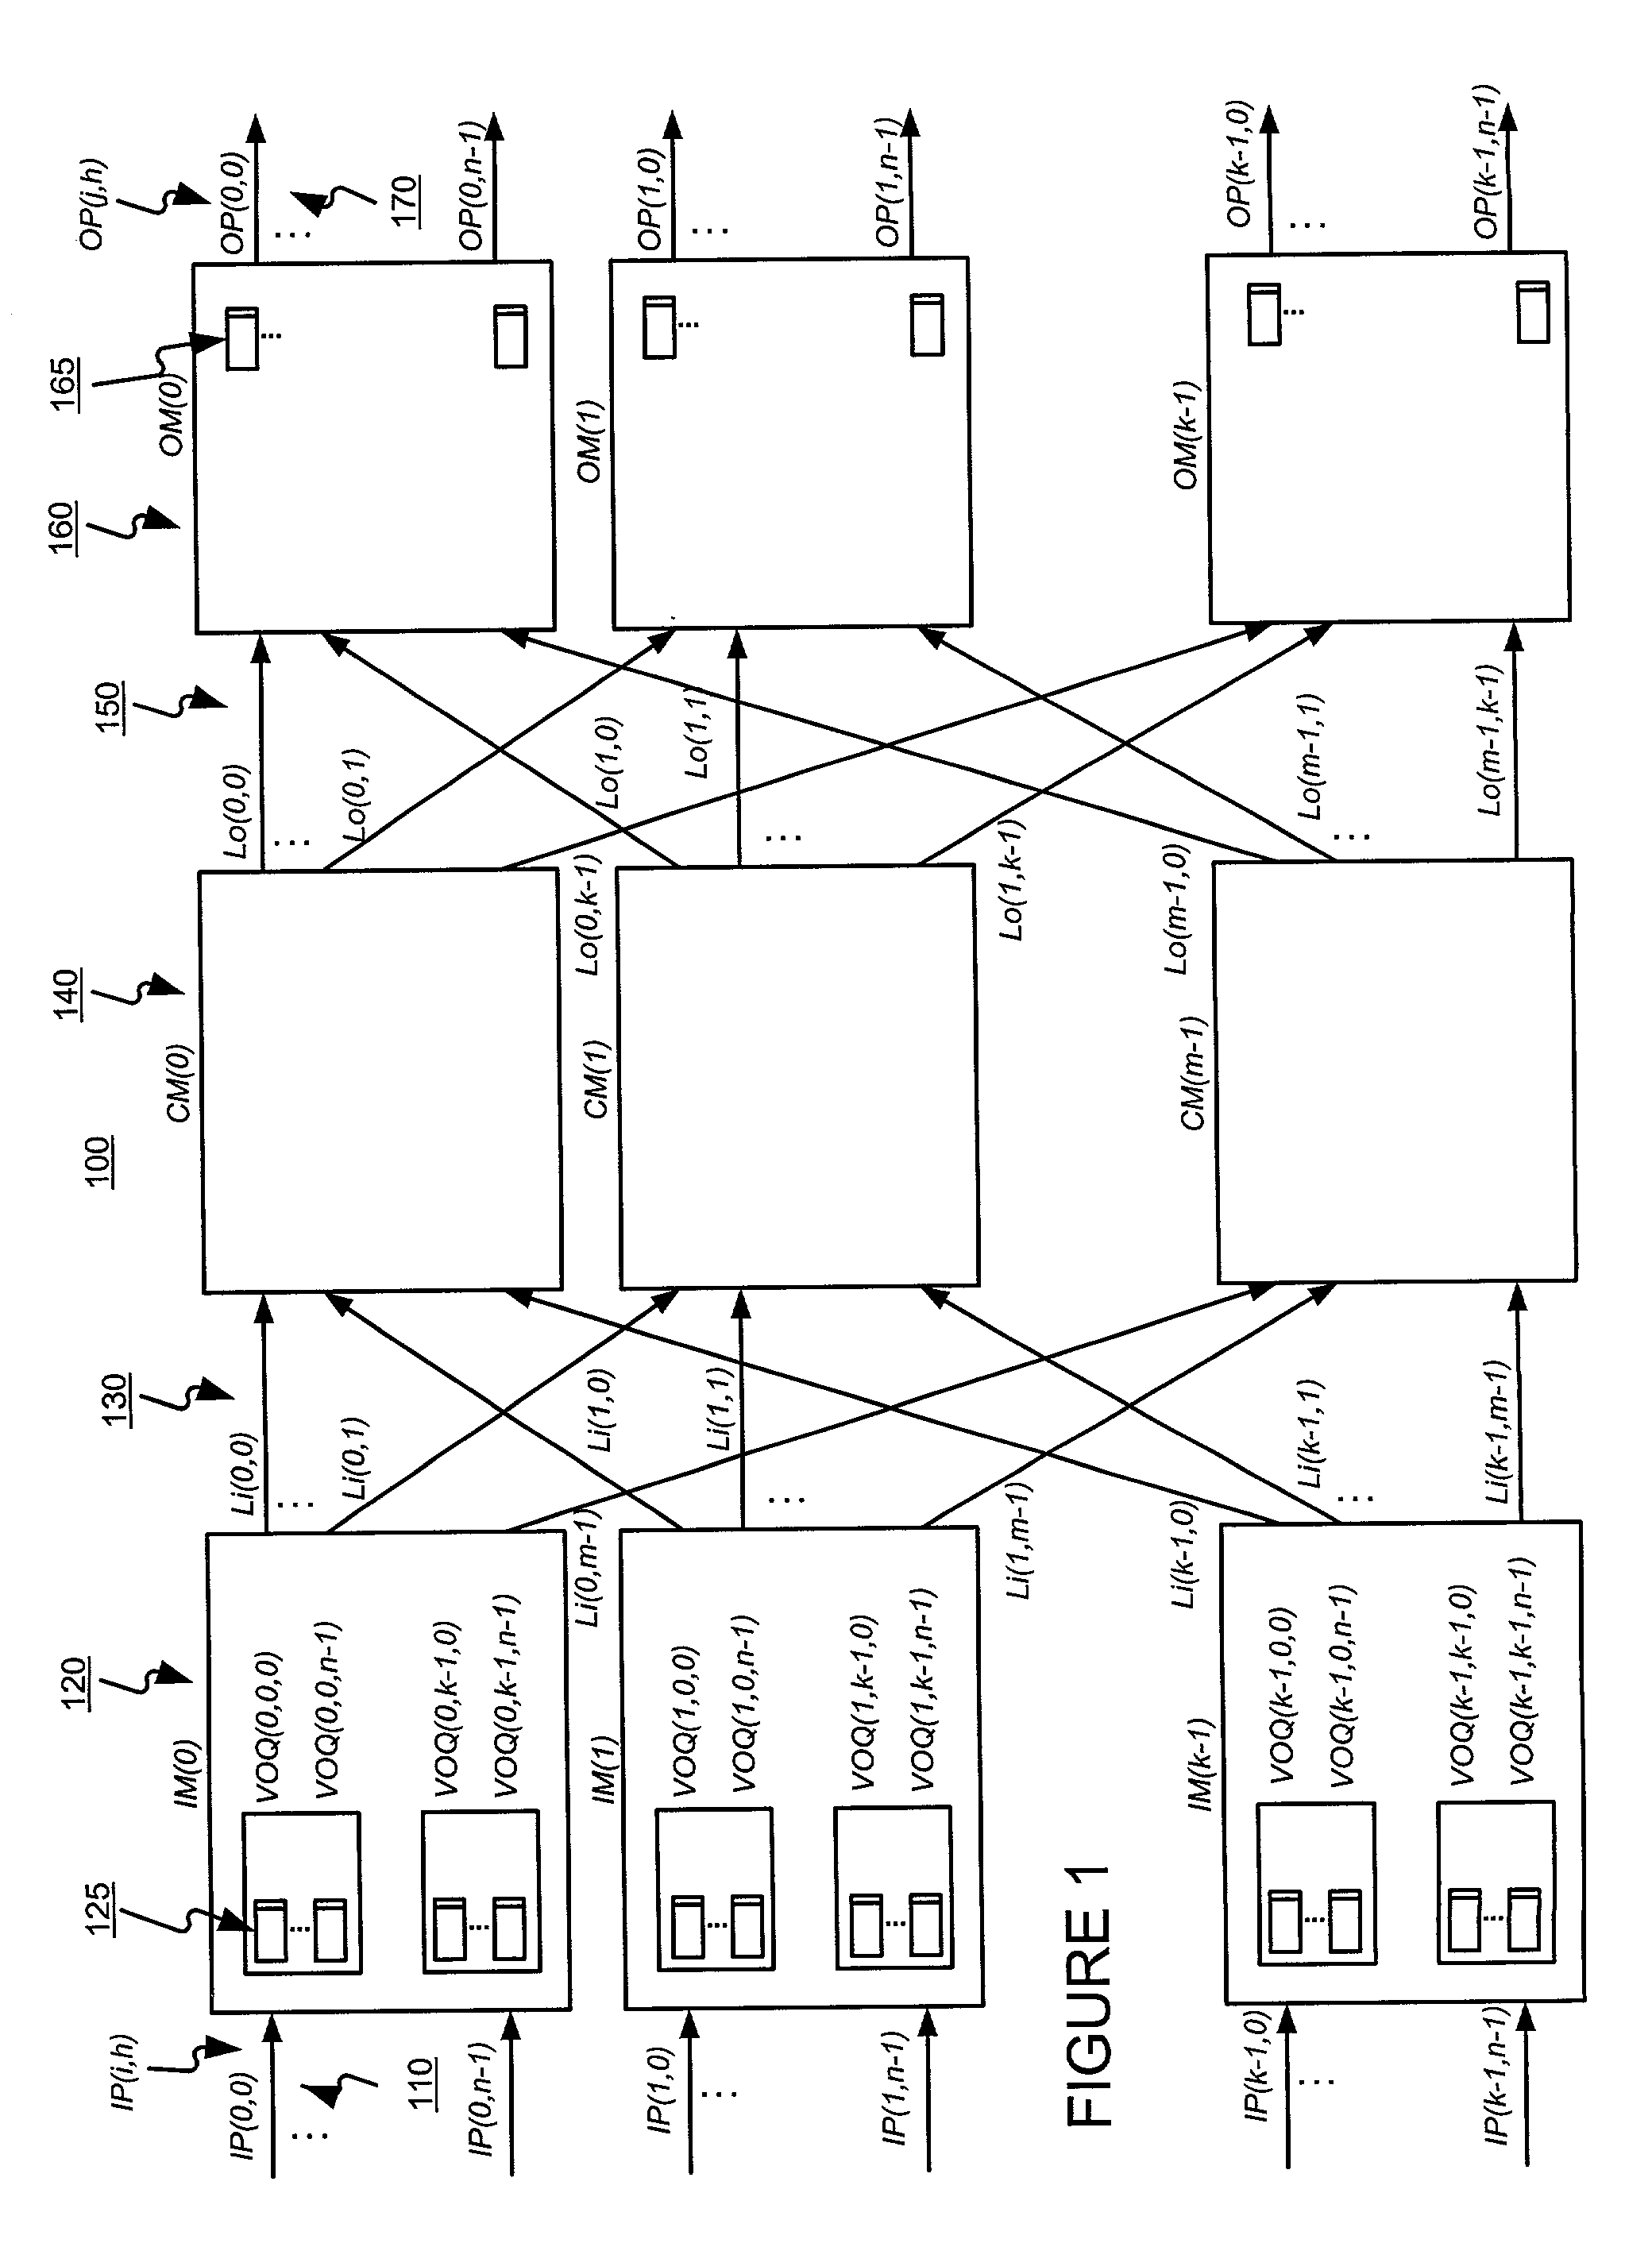 Scheduling the dispatch of cells in multistage switches